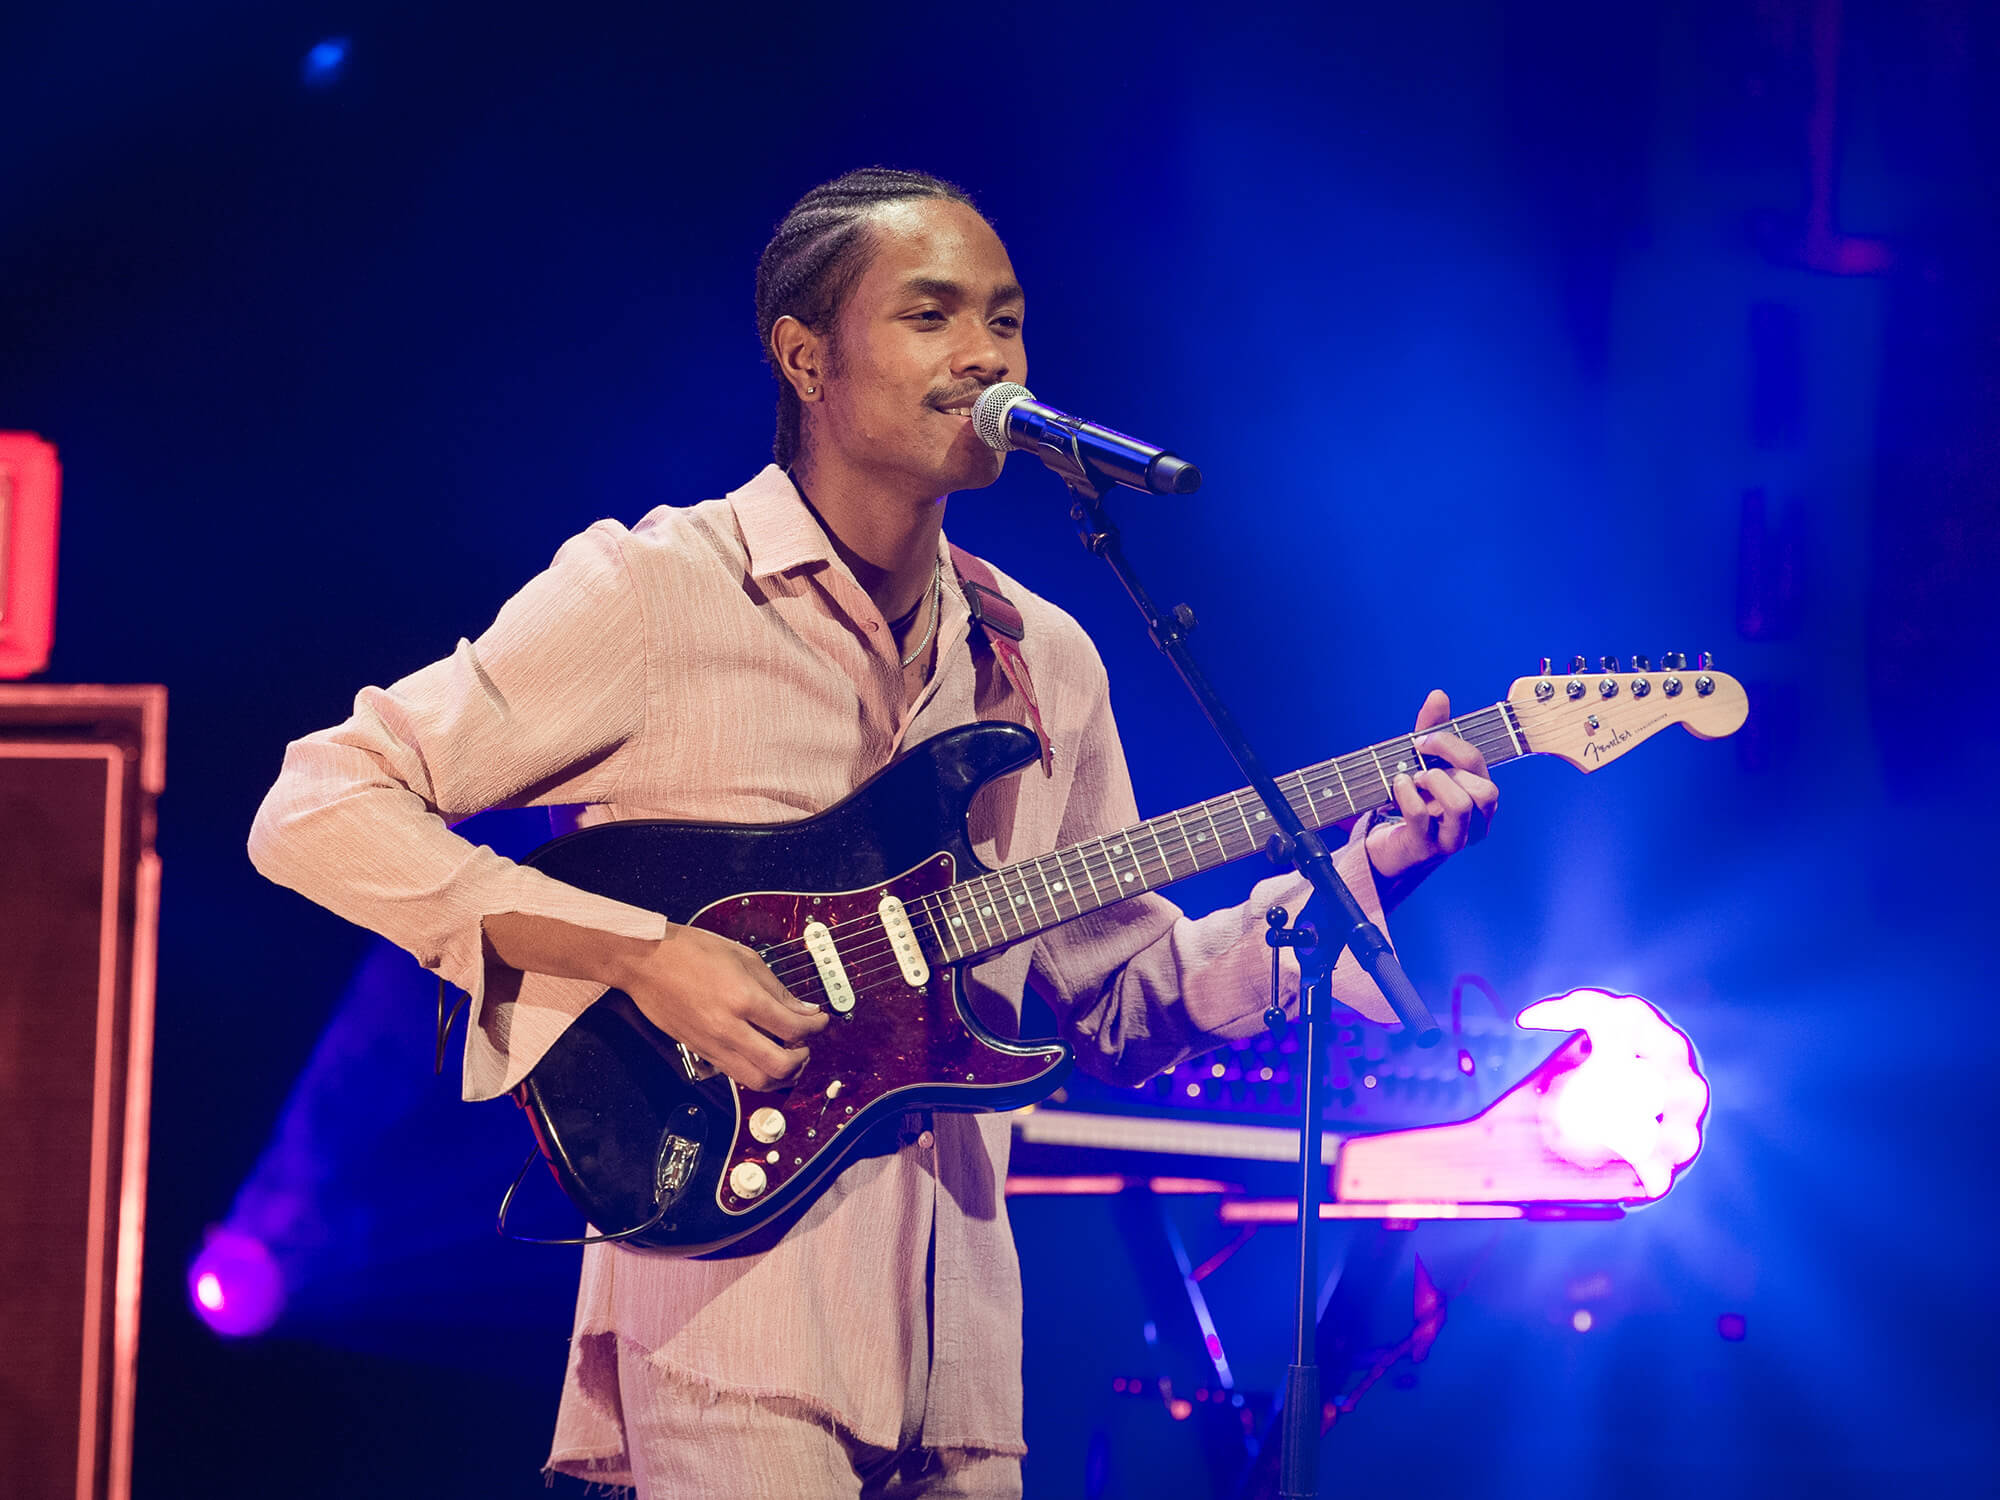 Steve Lacy performs at La Cigale on November 19, 2019 in Paris, France